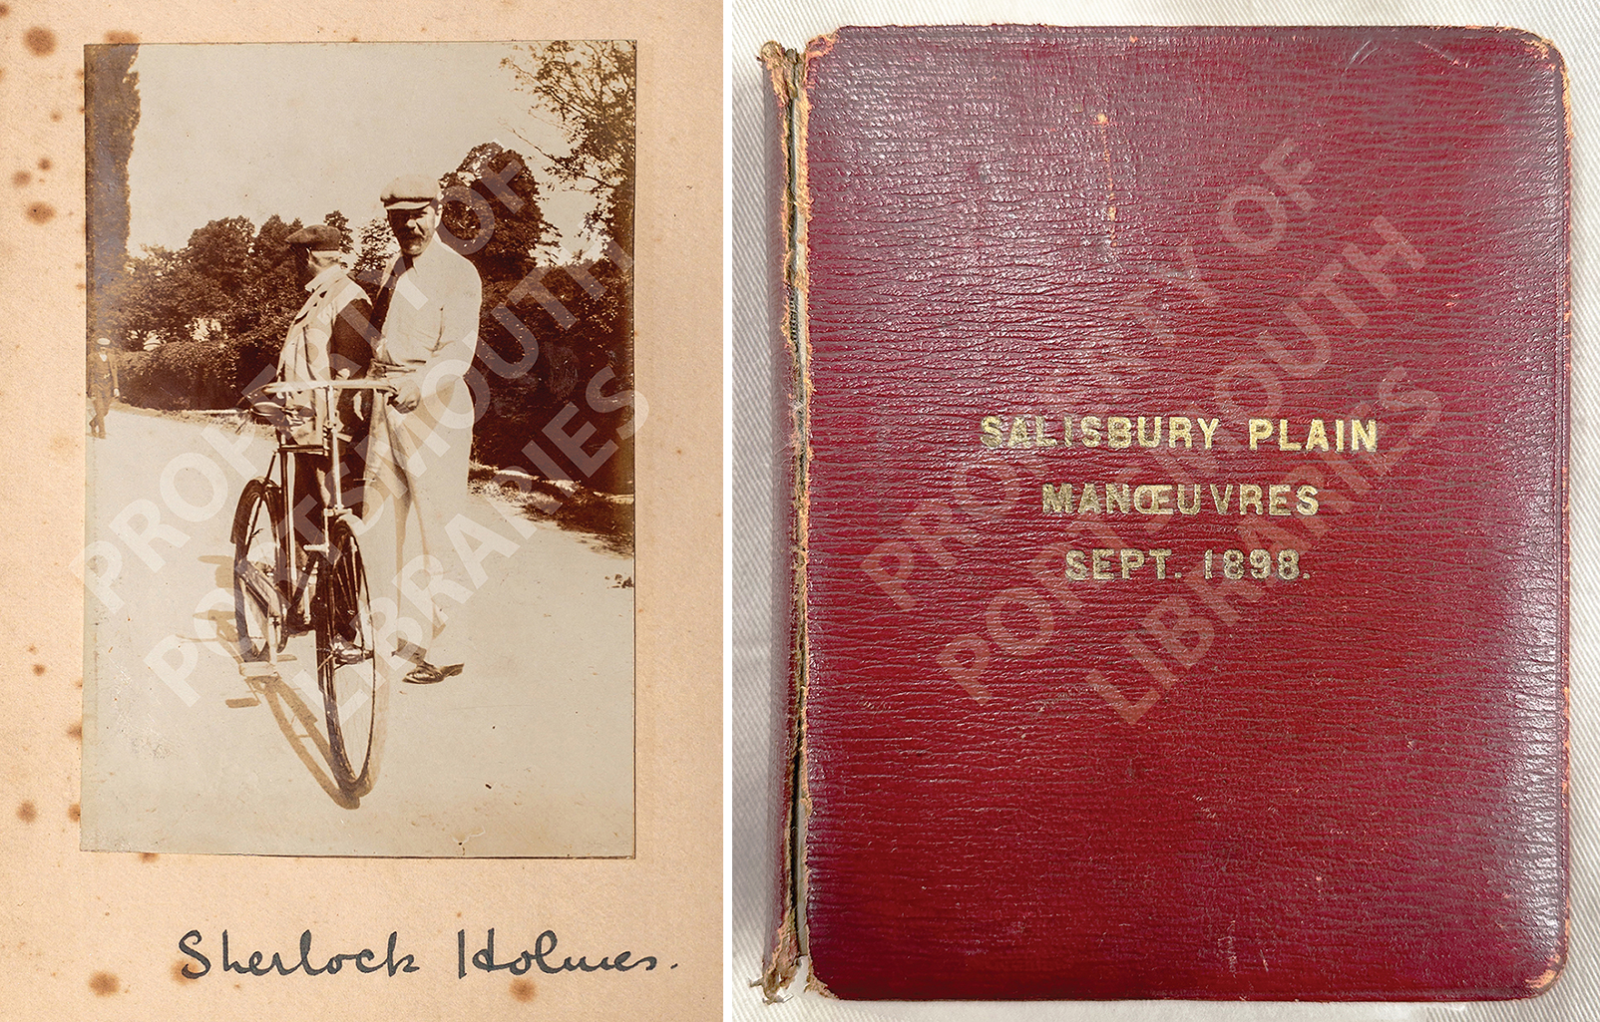 Two photos, one of a postcard showing Doyle on a bicycle and the front cover of a red book that reads: Salisbury Plain Manoeuvres Sept. 1898